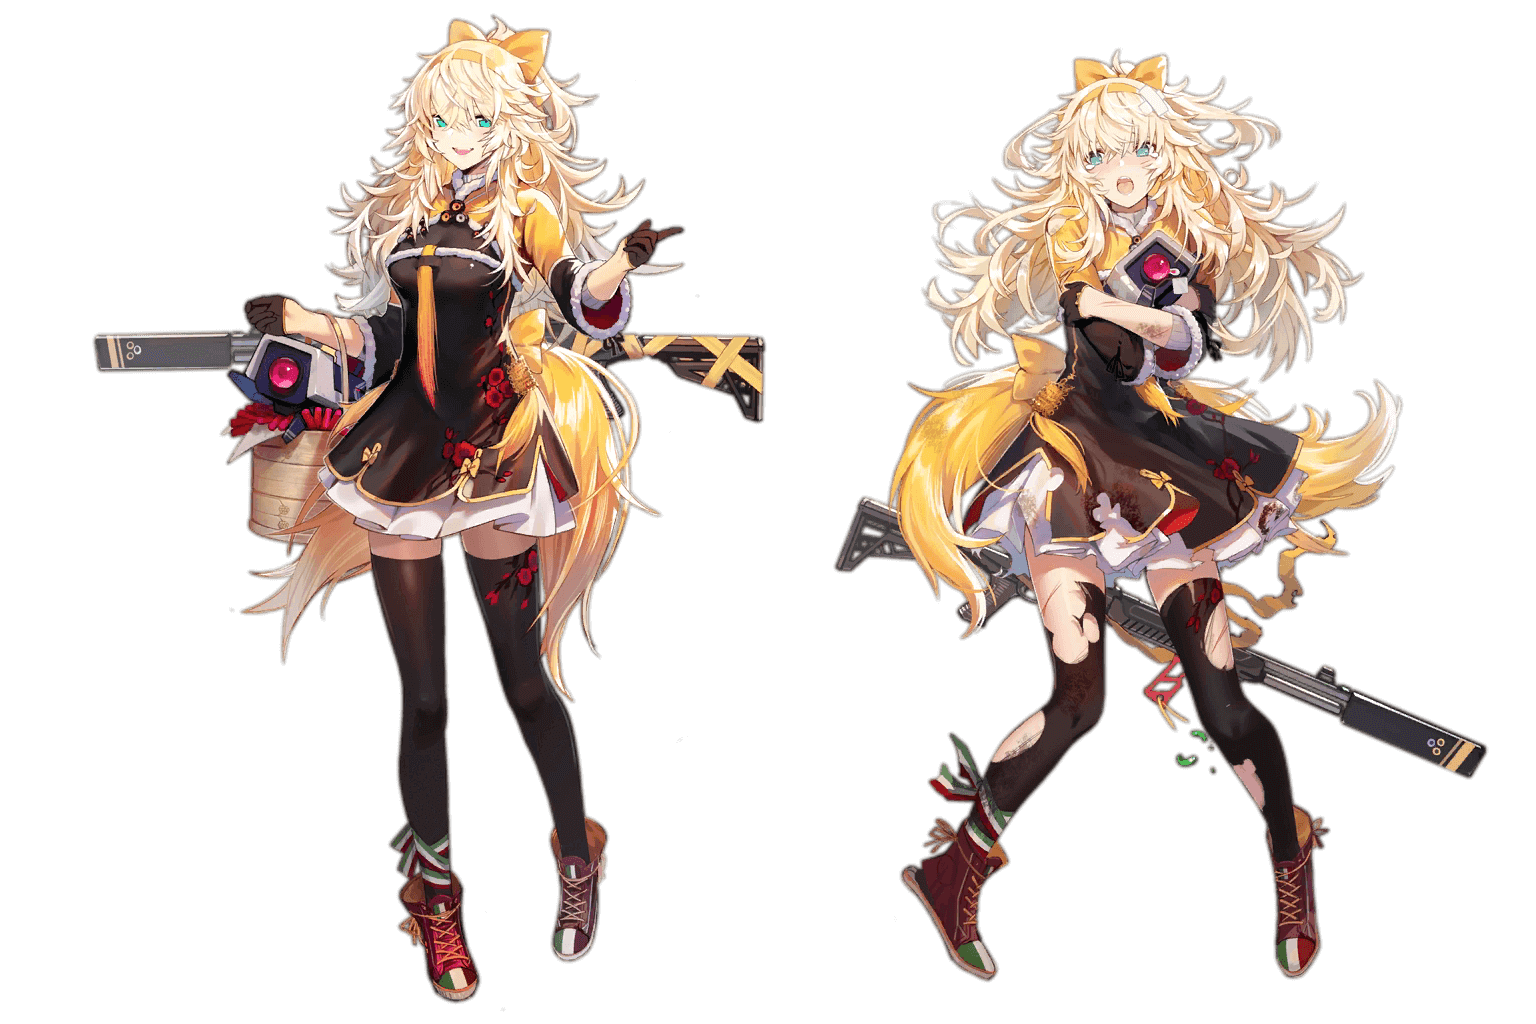 S.A.T.8's "Wintersweet" costume, normal and damaged art